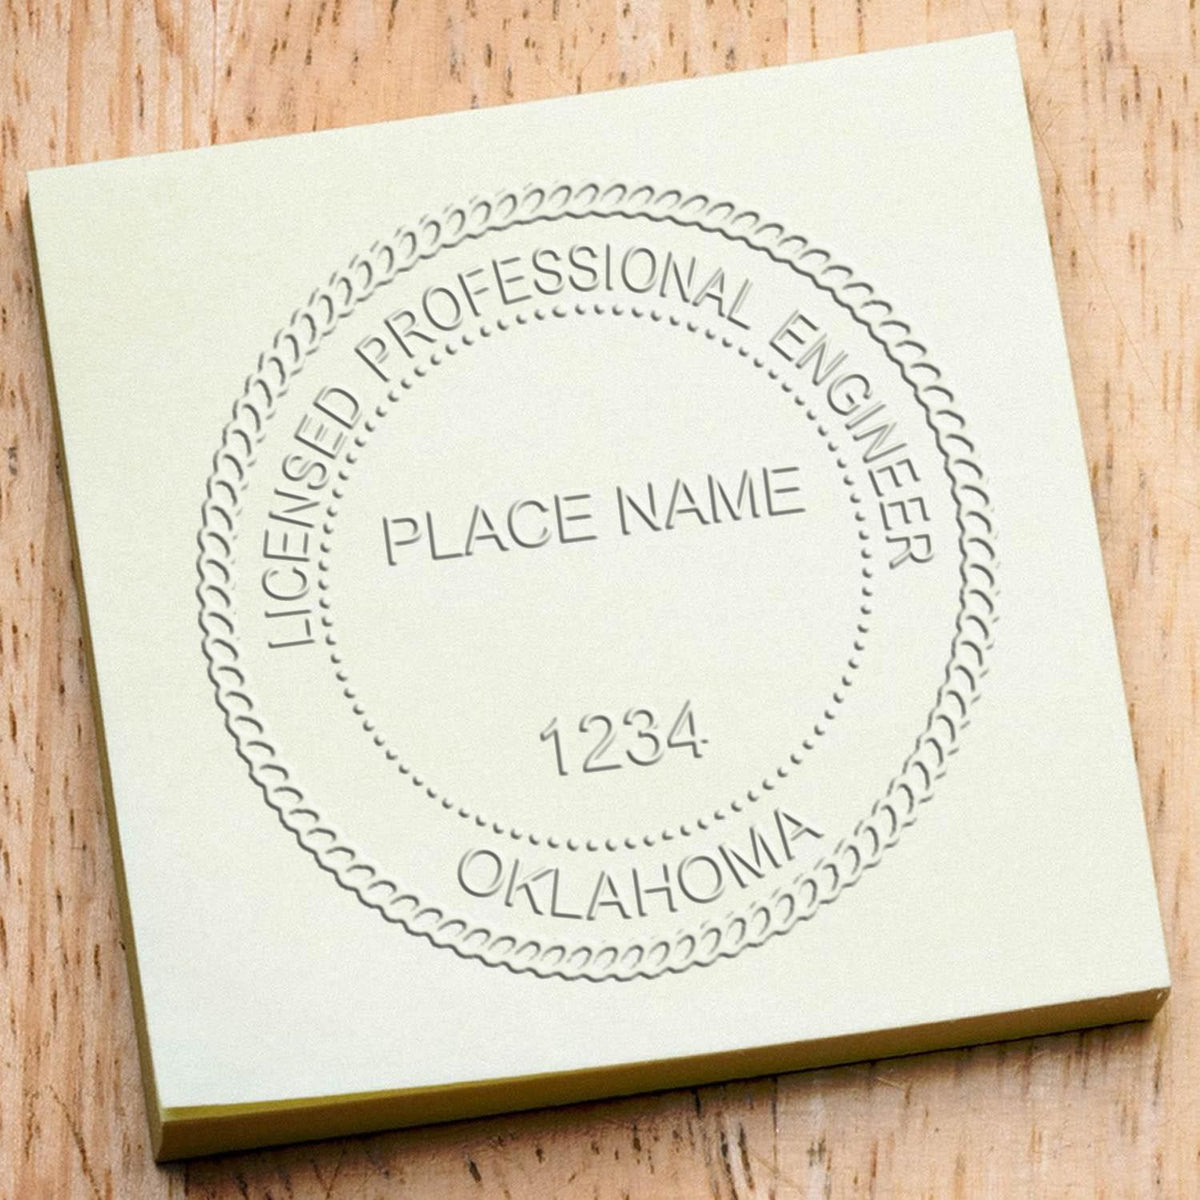 A stamped impression of the Oklahoma Engineer Desk Seal in this stylish lifestyle photo, setting the tone for a unique and personalized product.